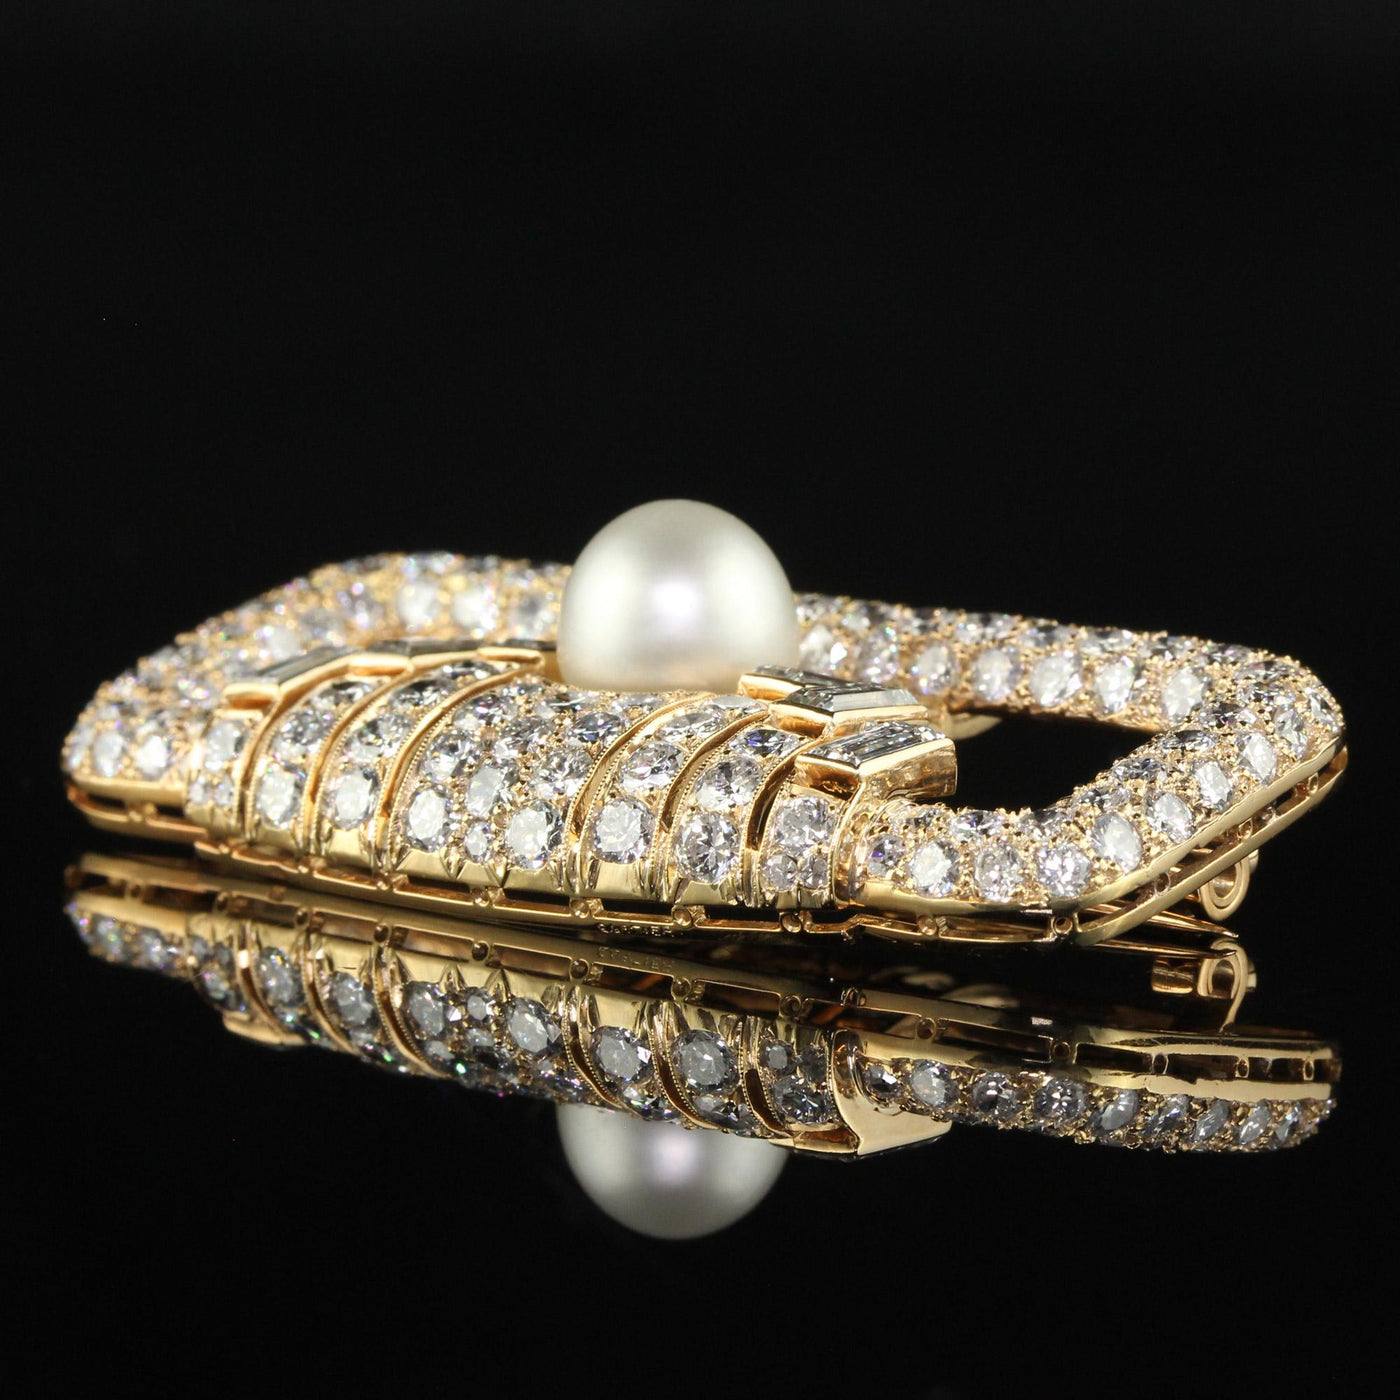 Vintage Retro Cartier 18K Yellow Gold Diamond Natural Pearl Brooch Pin - GIA